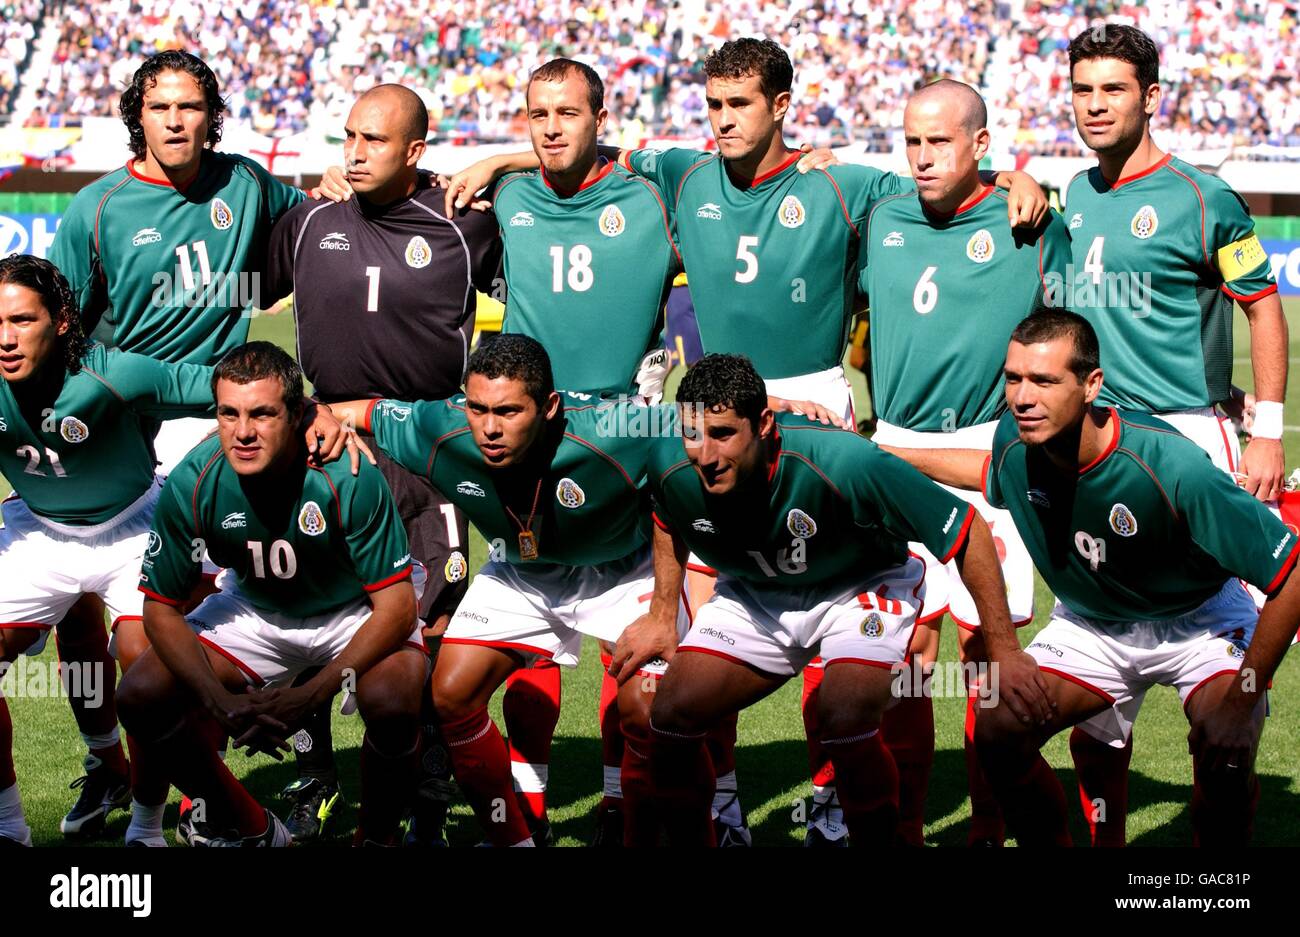 mexico 2002 world cup jersey